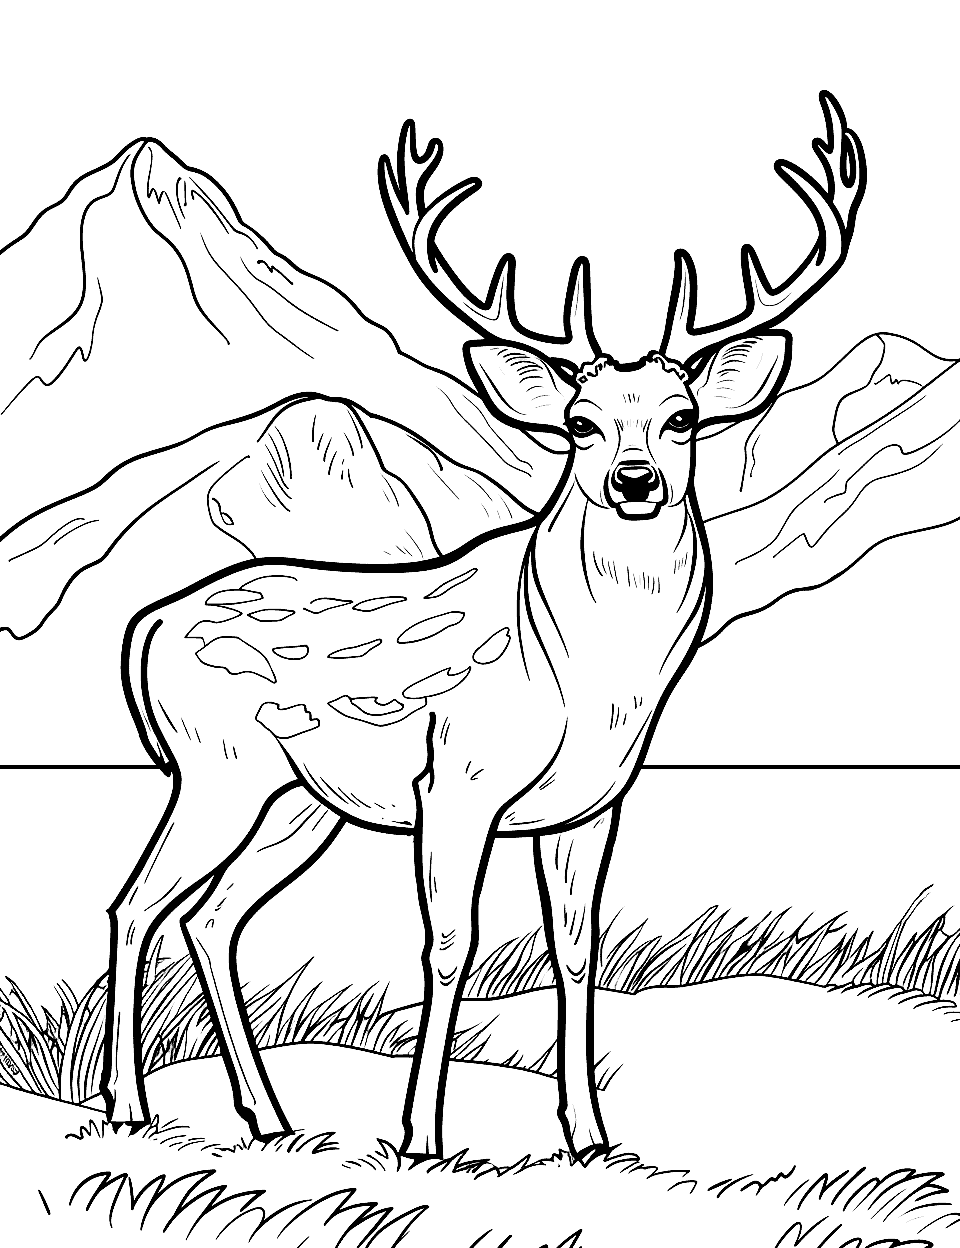 Deer with Snow-Capped Mountains Coloring Page - A serene deer with majestic snow-capped mountains behind.